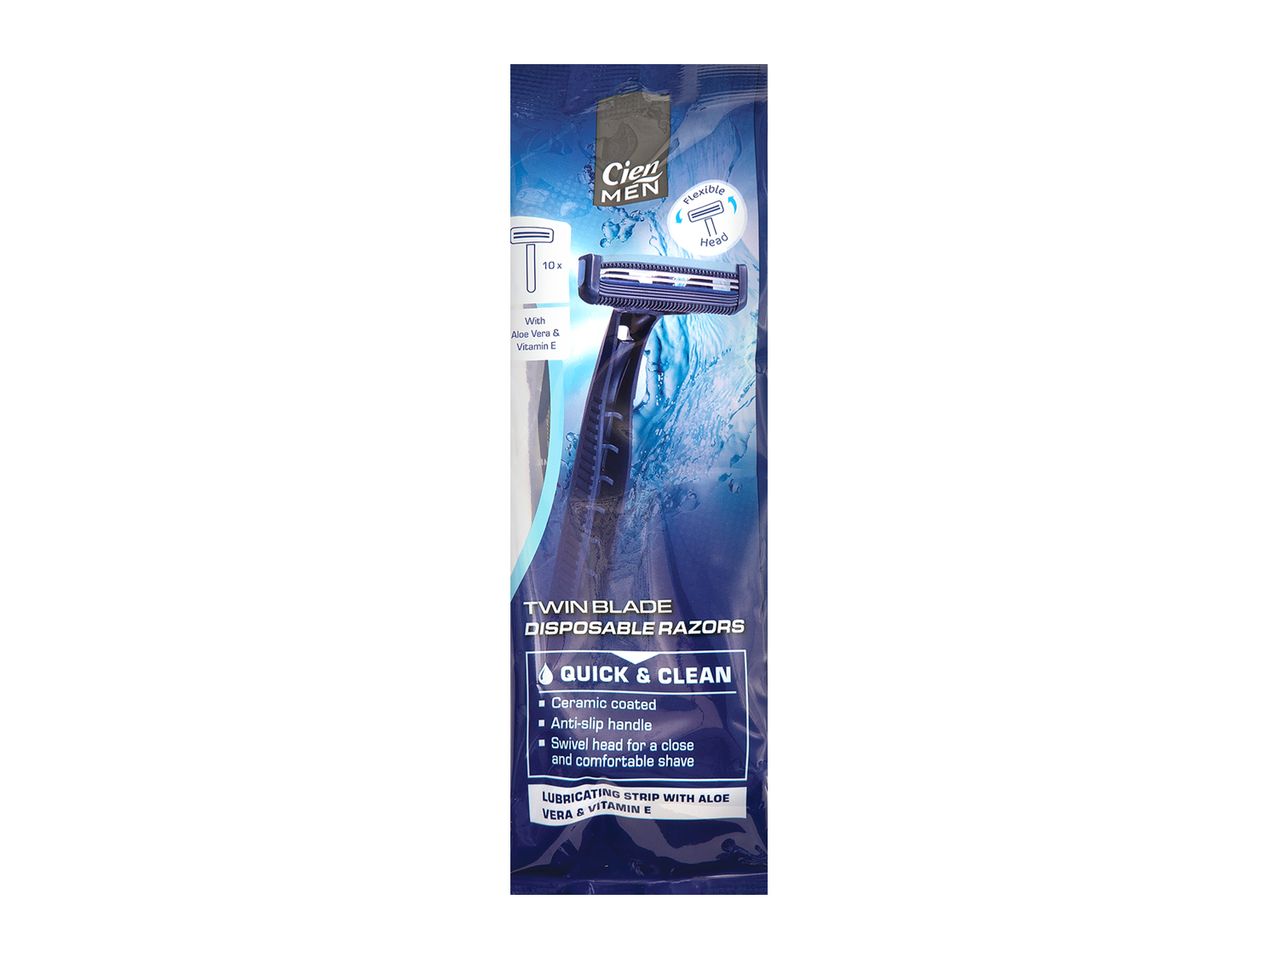 Go to full screen view: Cien Men Twinblade Disposable Razor - Image 1